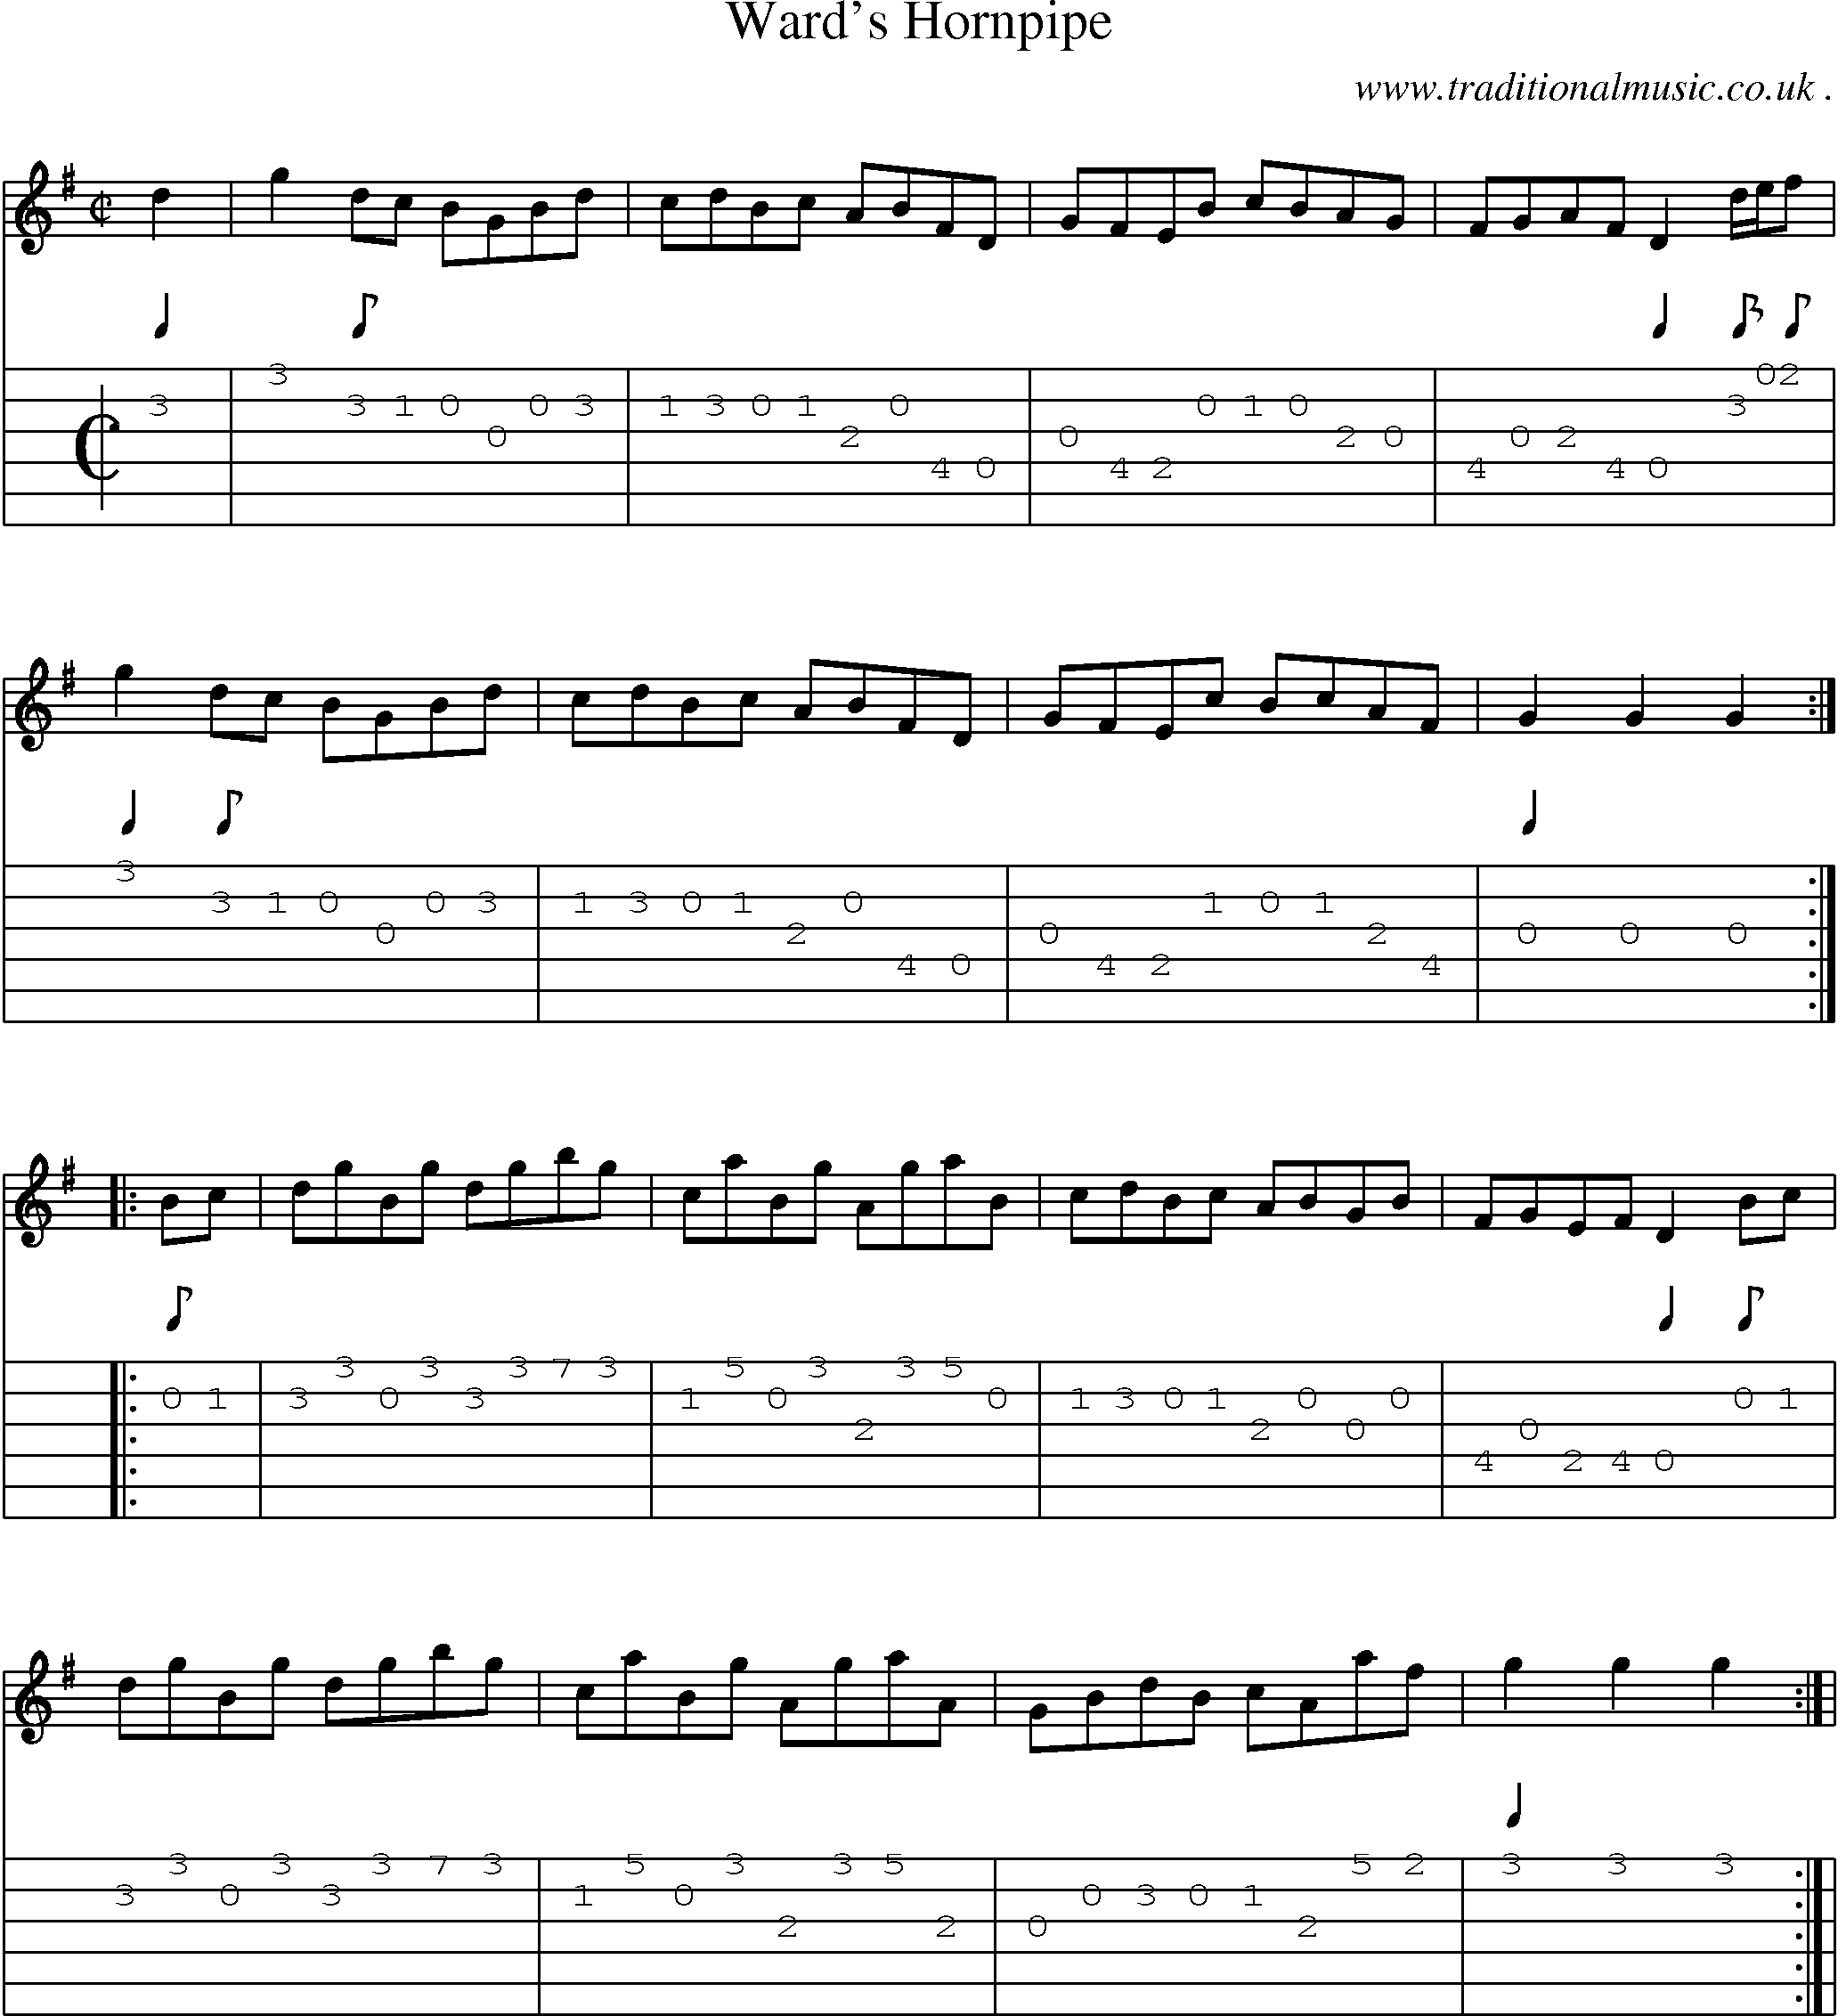 Sheet-Music and Guitar Tabs for Wards Hornpipe